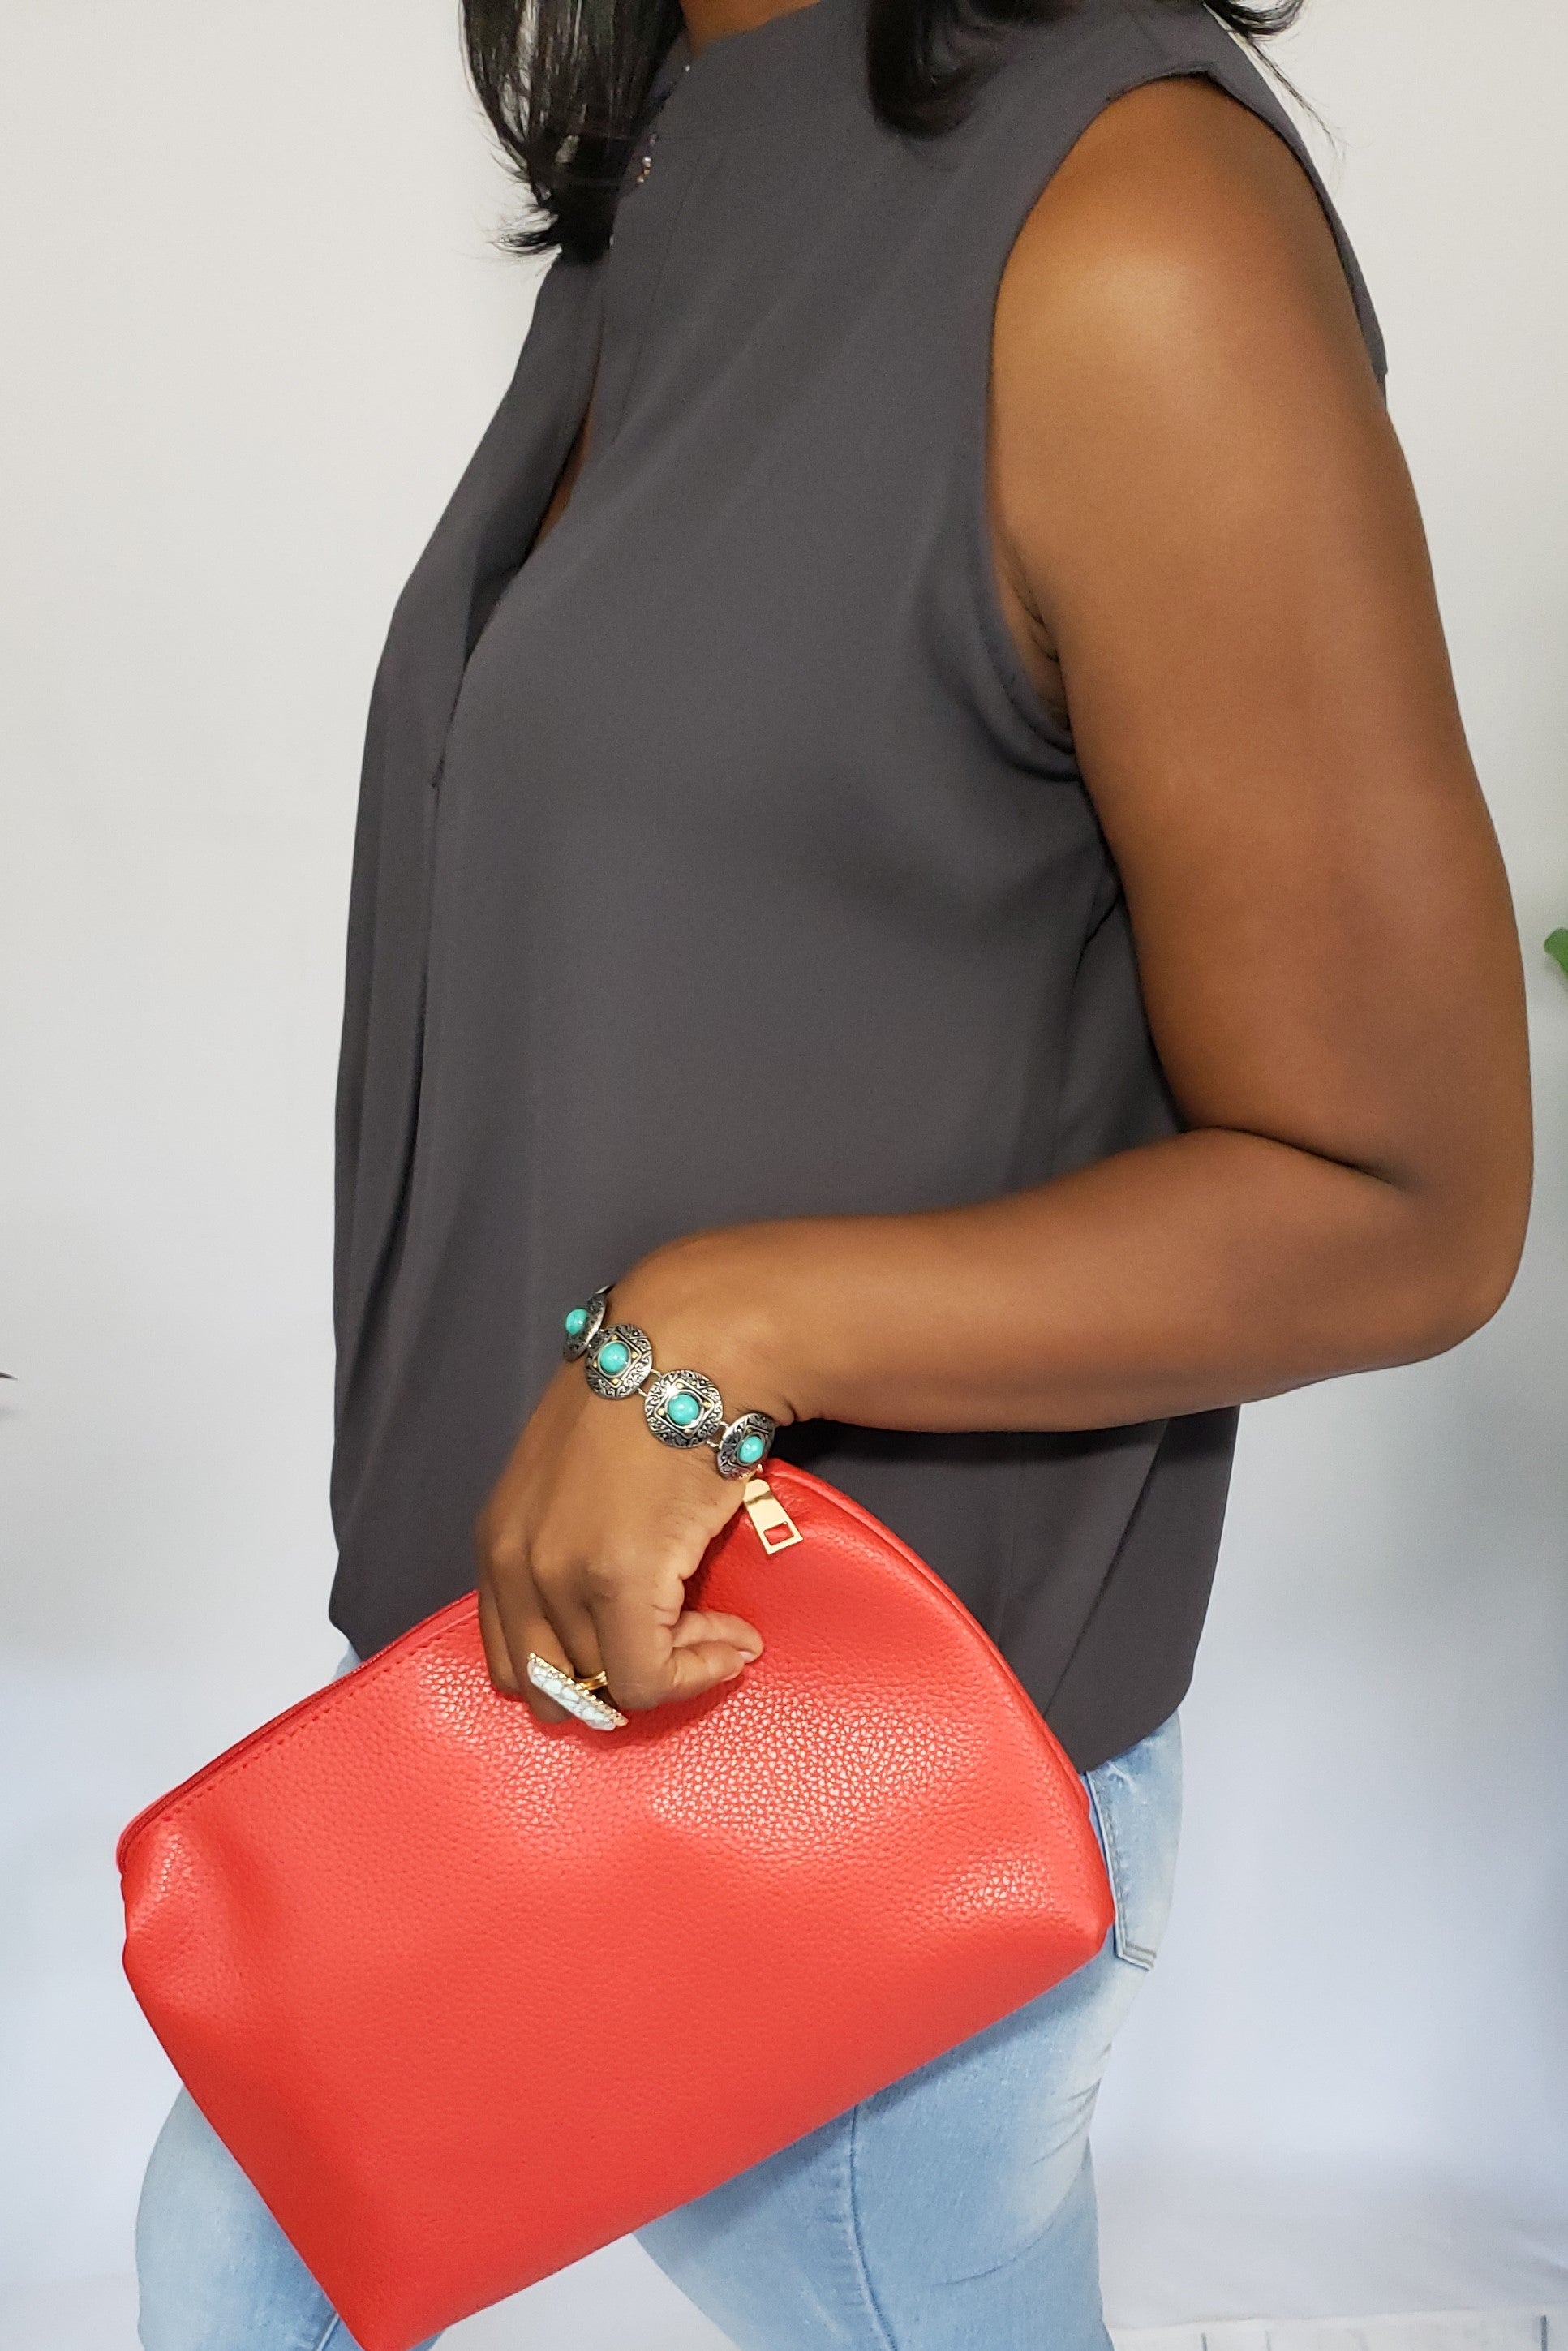 Miss-Dawn Red Vegan Leather Tote Bag with Removable Strap and Matching Pouch. - Houzz of DVA Boutique